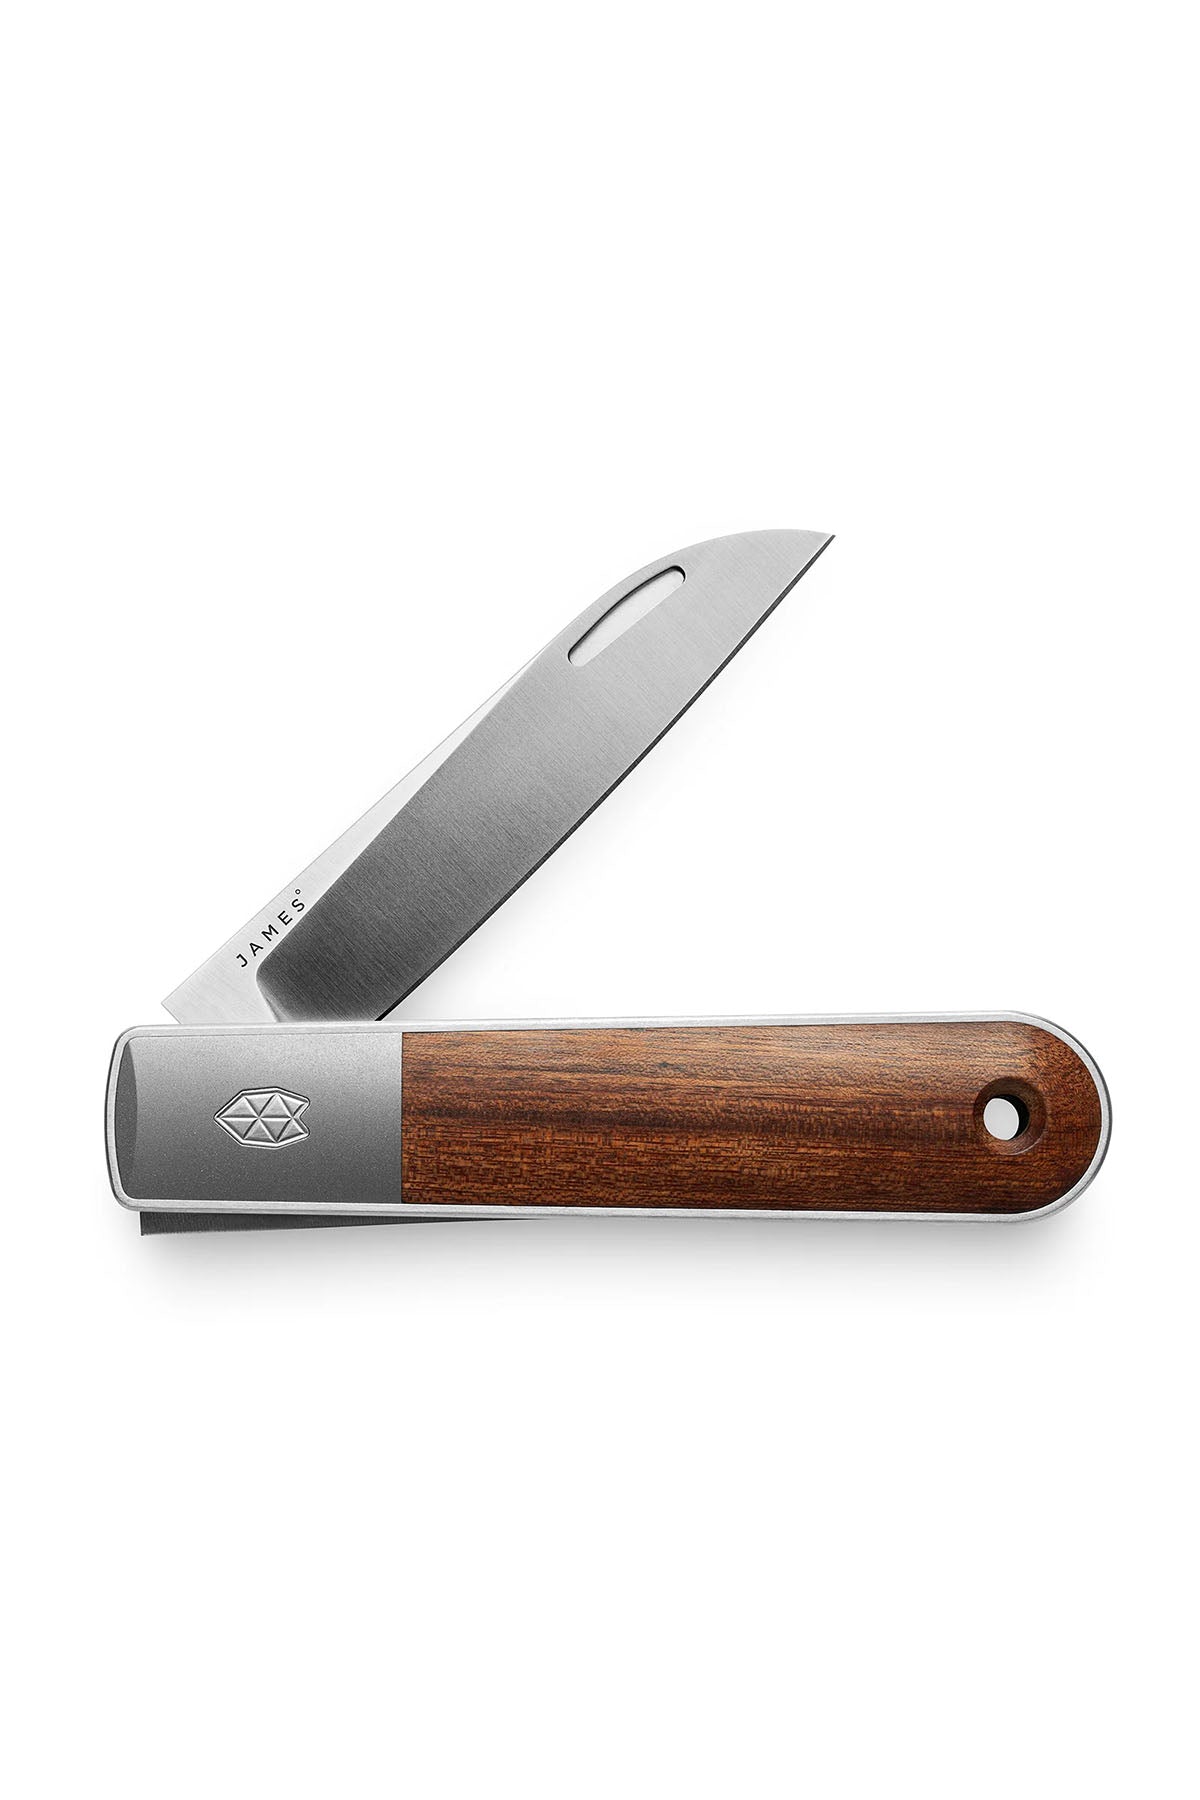 The James Brand - The Wayland Knife - Rosewood/Stainless/Straight